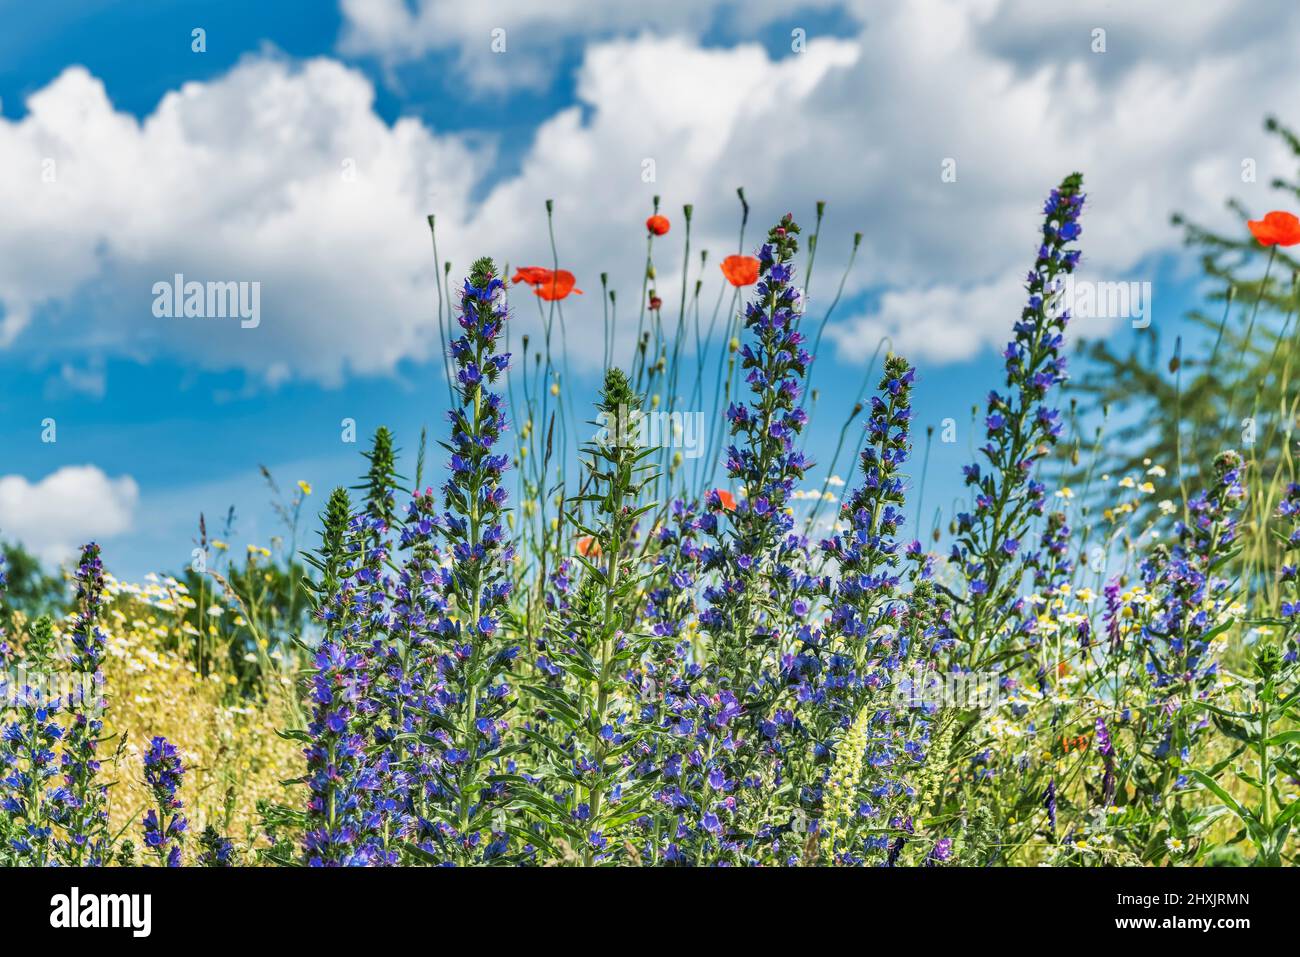 A colorful flower meadow in springtime Stock Photo